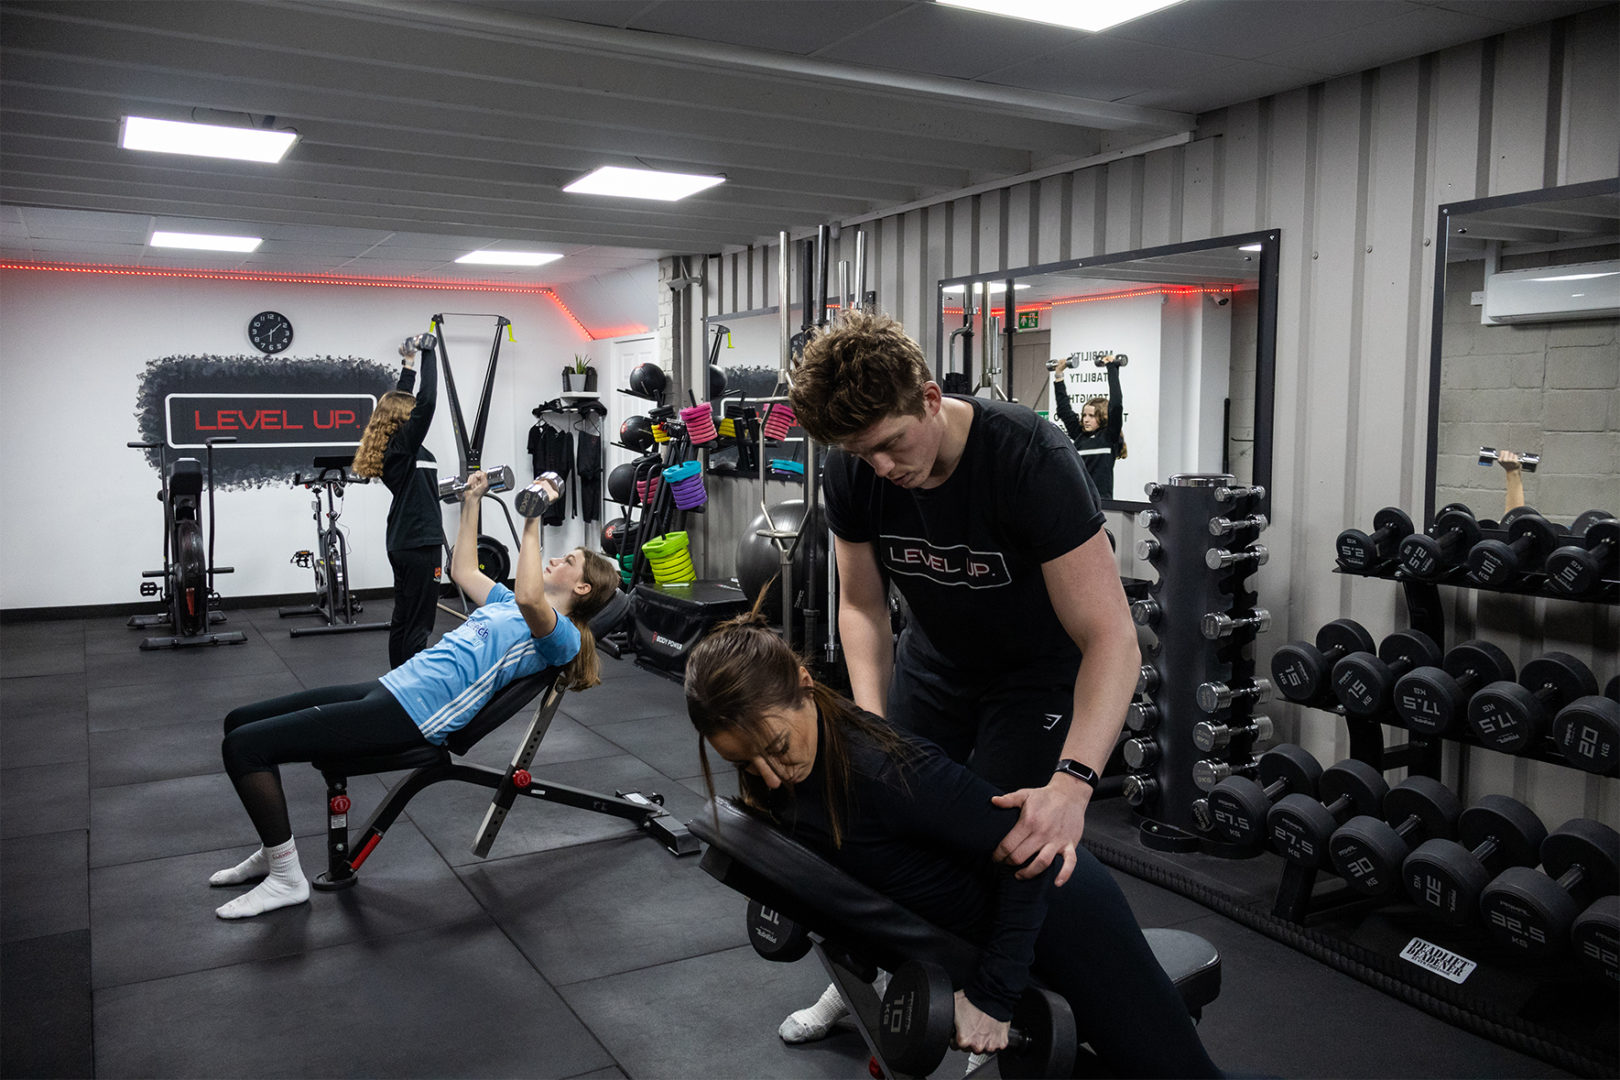 Instructor assisting client with weights during a temp class, in the background there is another client using the free weights on a bench